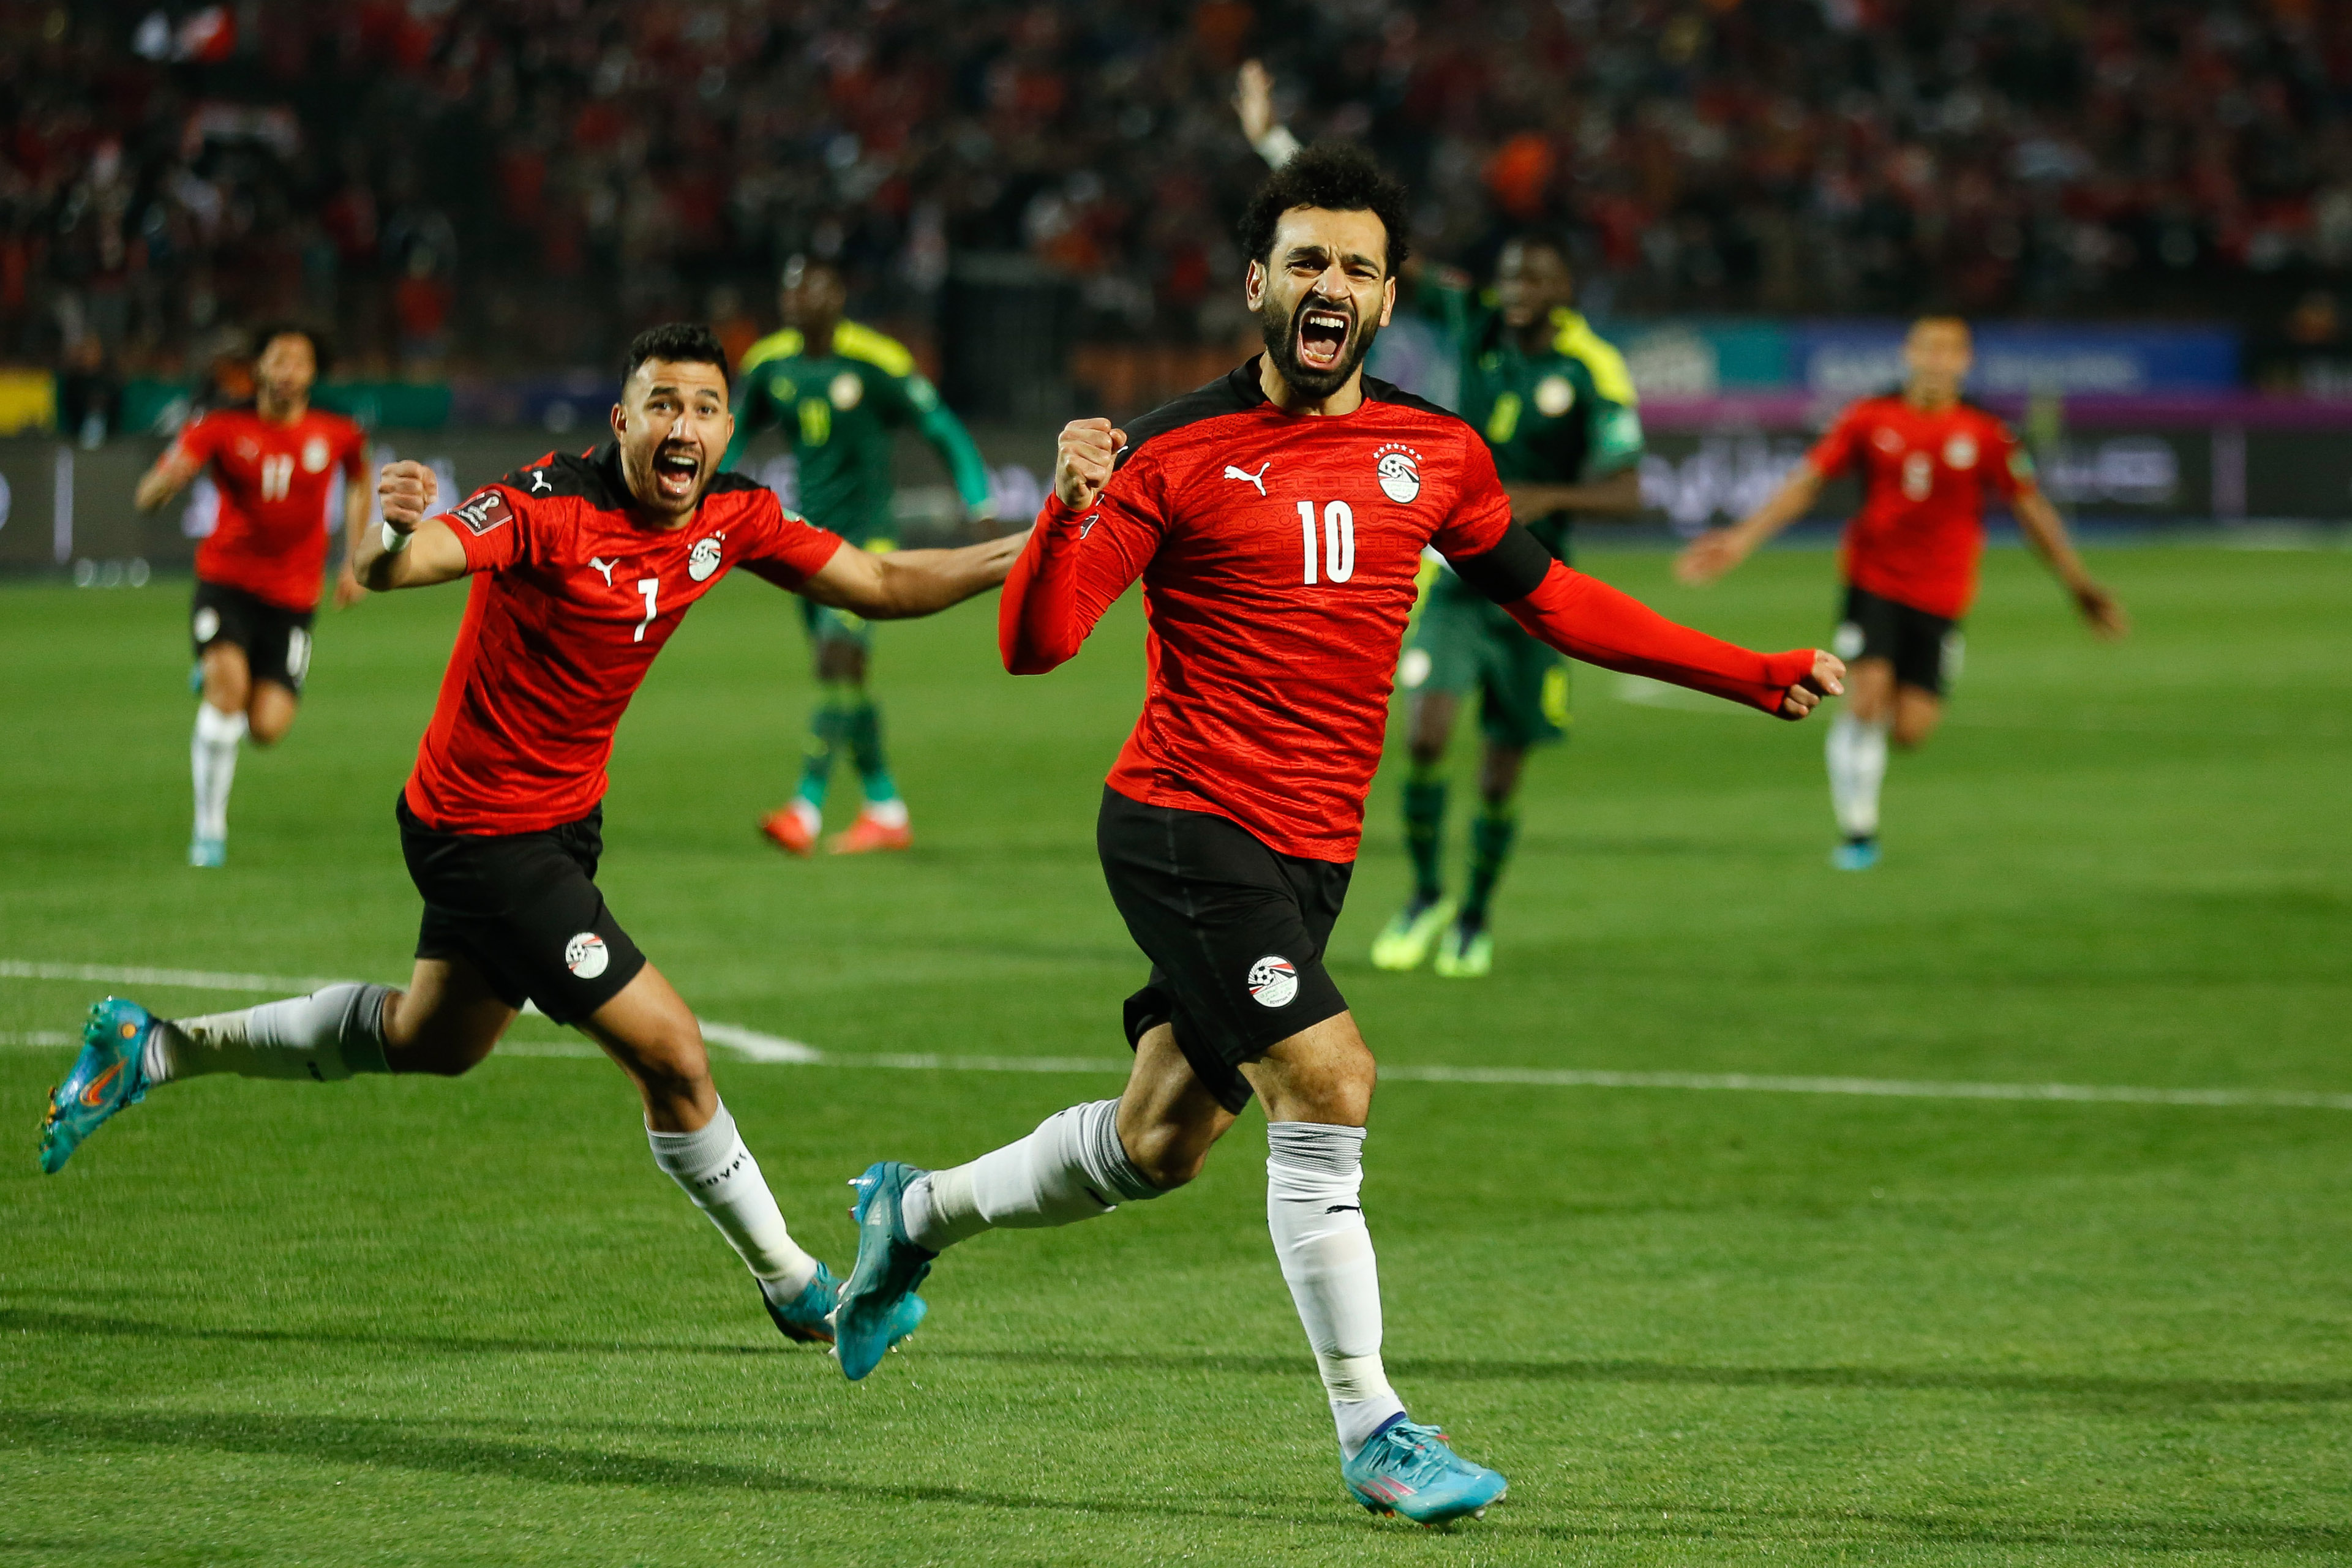 Egypt 1-0 Senegal 1st Leg LIVE: ADVANTAGE Egypt – Mo Salah gets AFCON revenge on Sadio Mane as Senegal were beaten 1-0 by Egypt in the 1st leg of the CAF World Cup Qualifiers